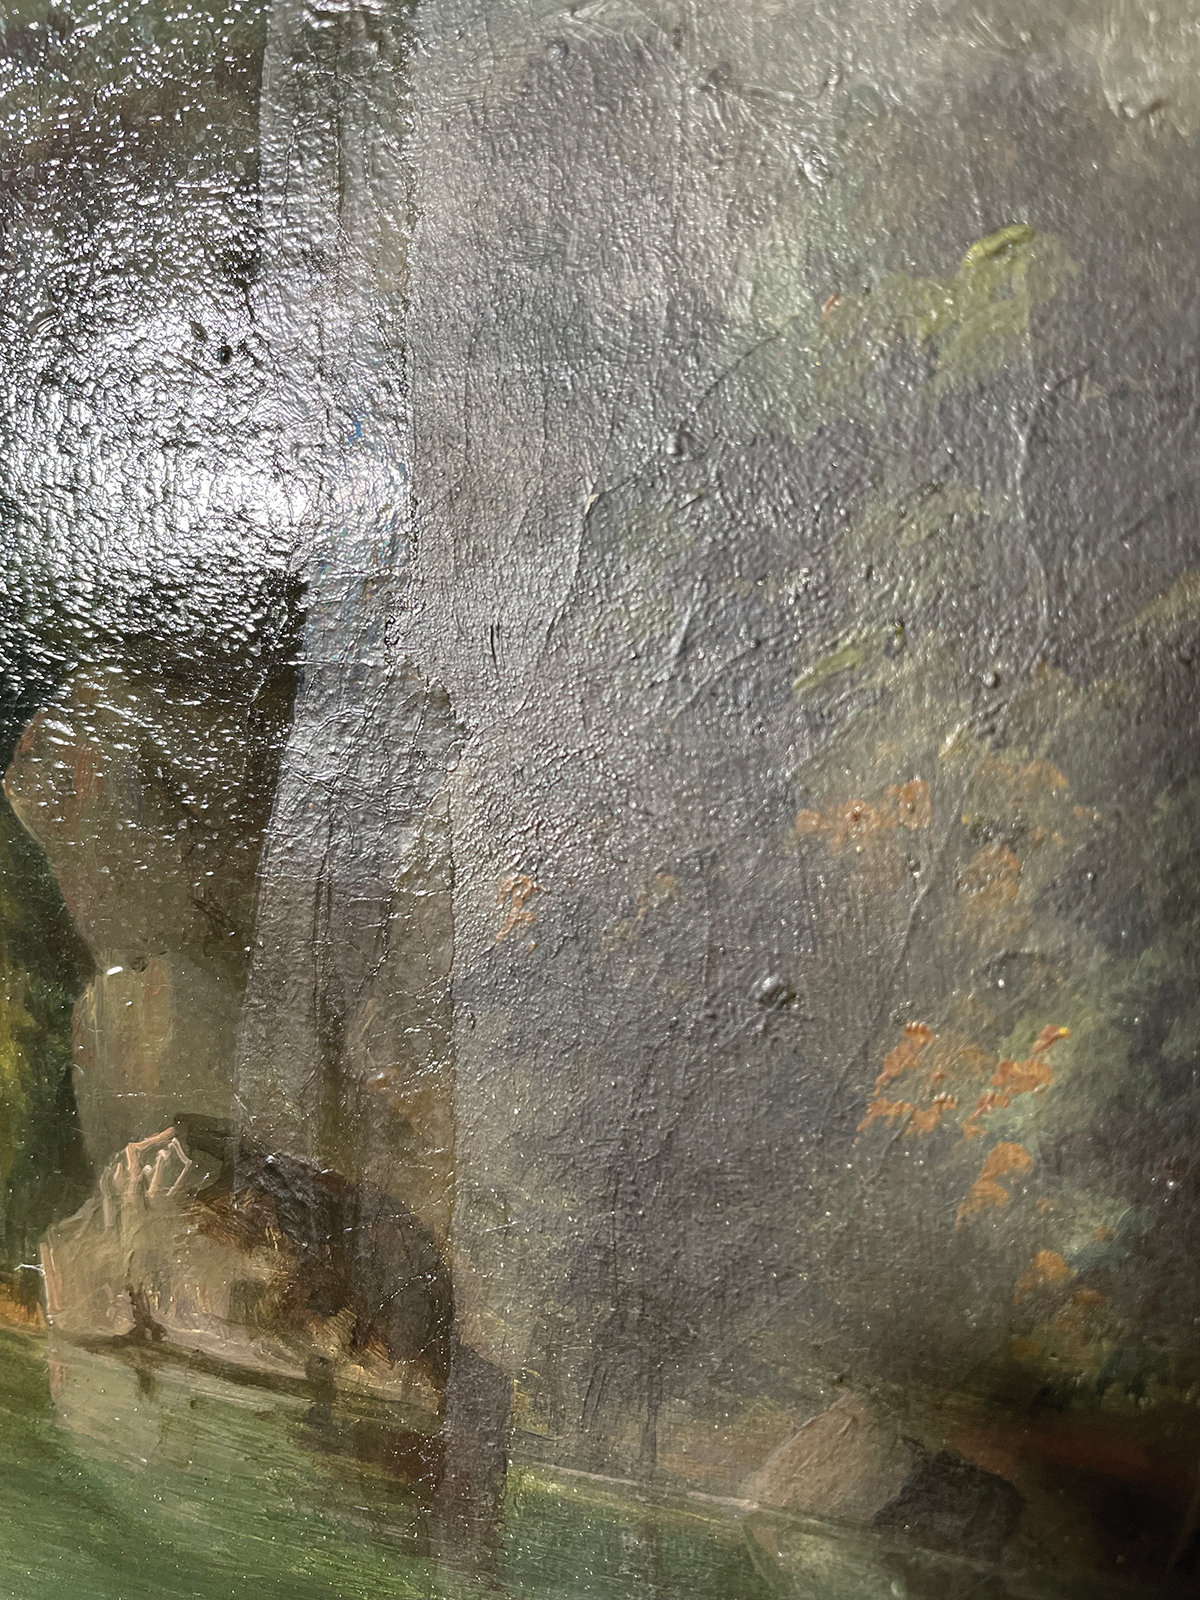 A close-up view of a painting’s canvas shows a portion of the left side with a glaring, shiny varnish, while the right side is in a matte finish after the varnish has been removed.